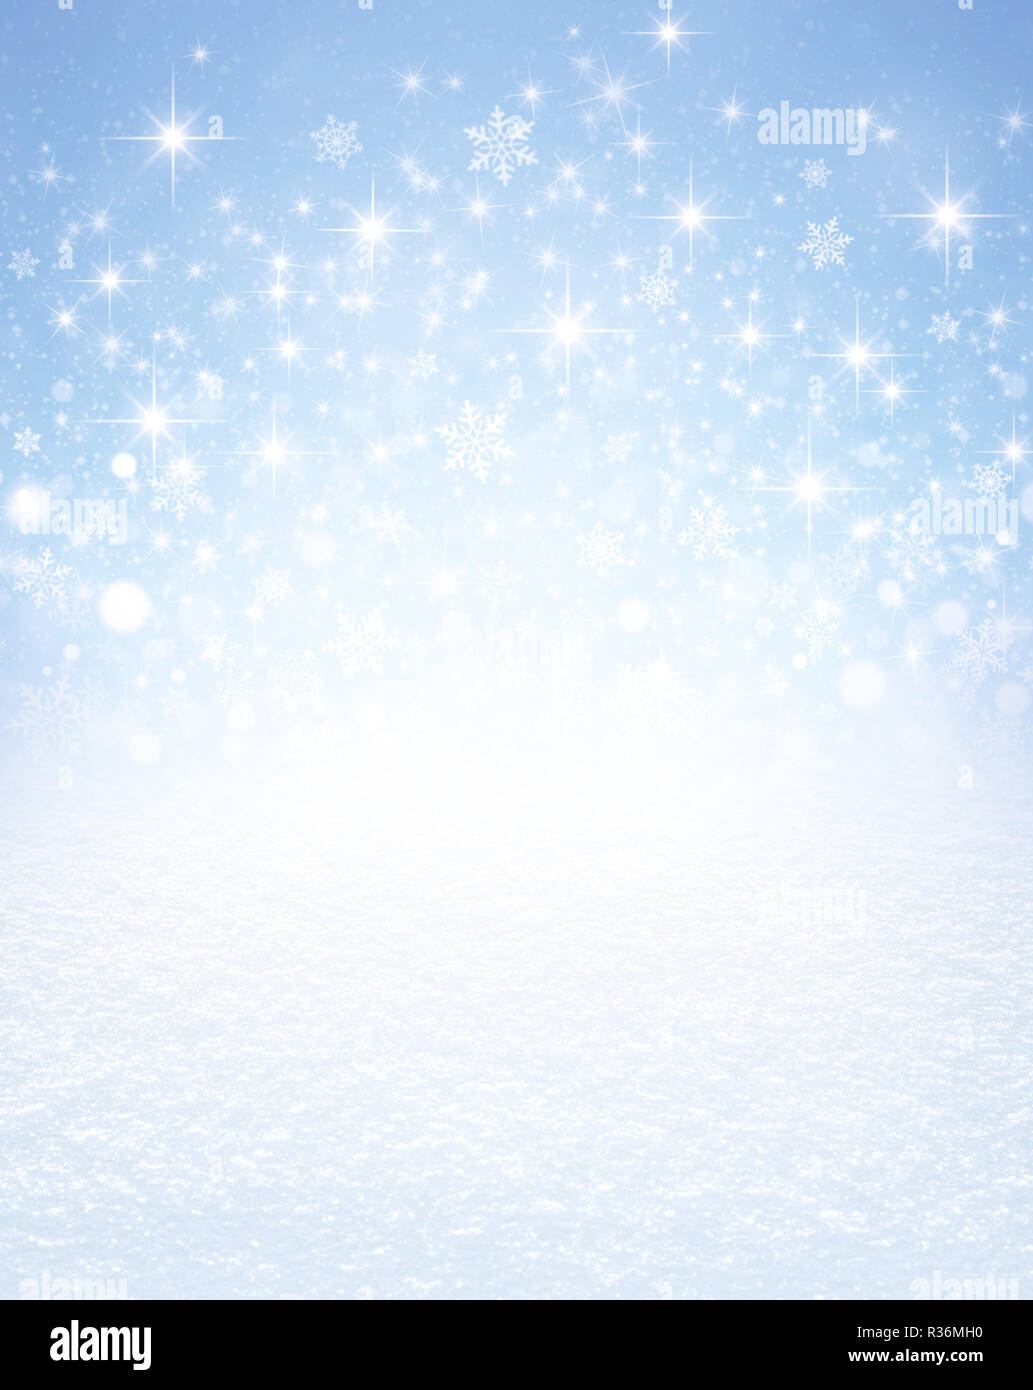 Snowflakes shapes and bright stars exploding on an icy blue background and white snow covered ground. Festive seasonal material. Stock Photo